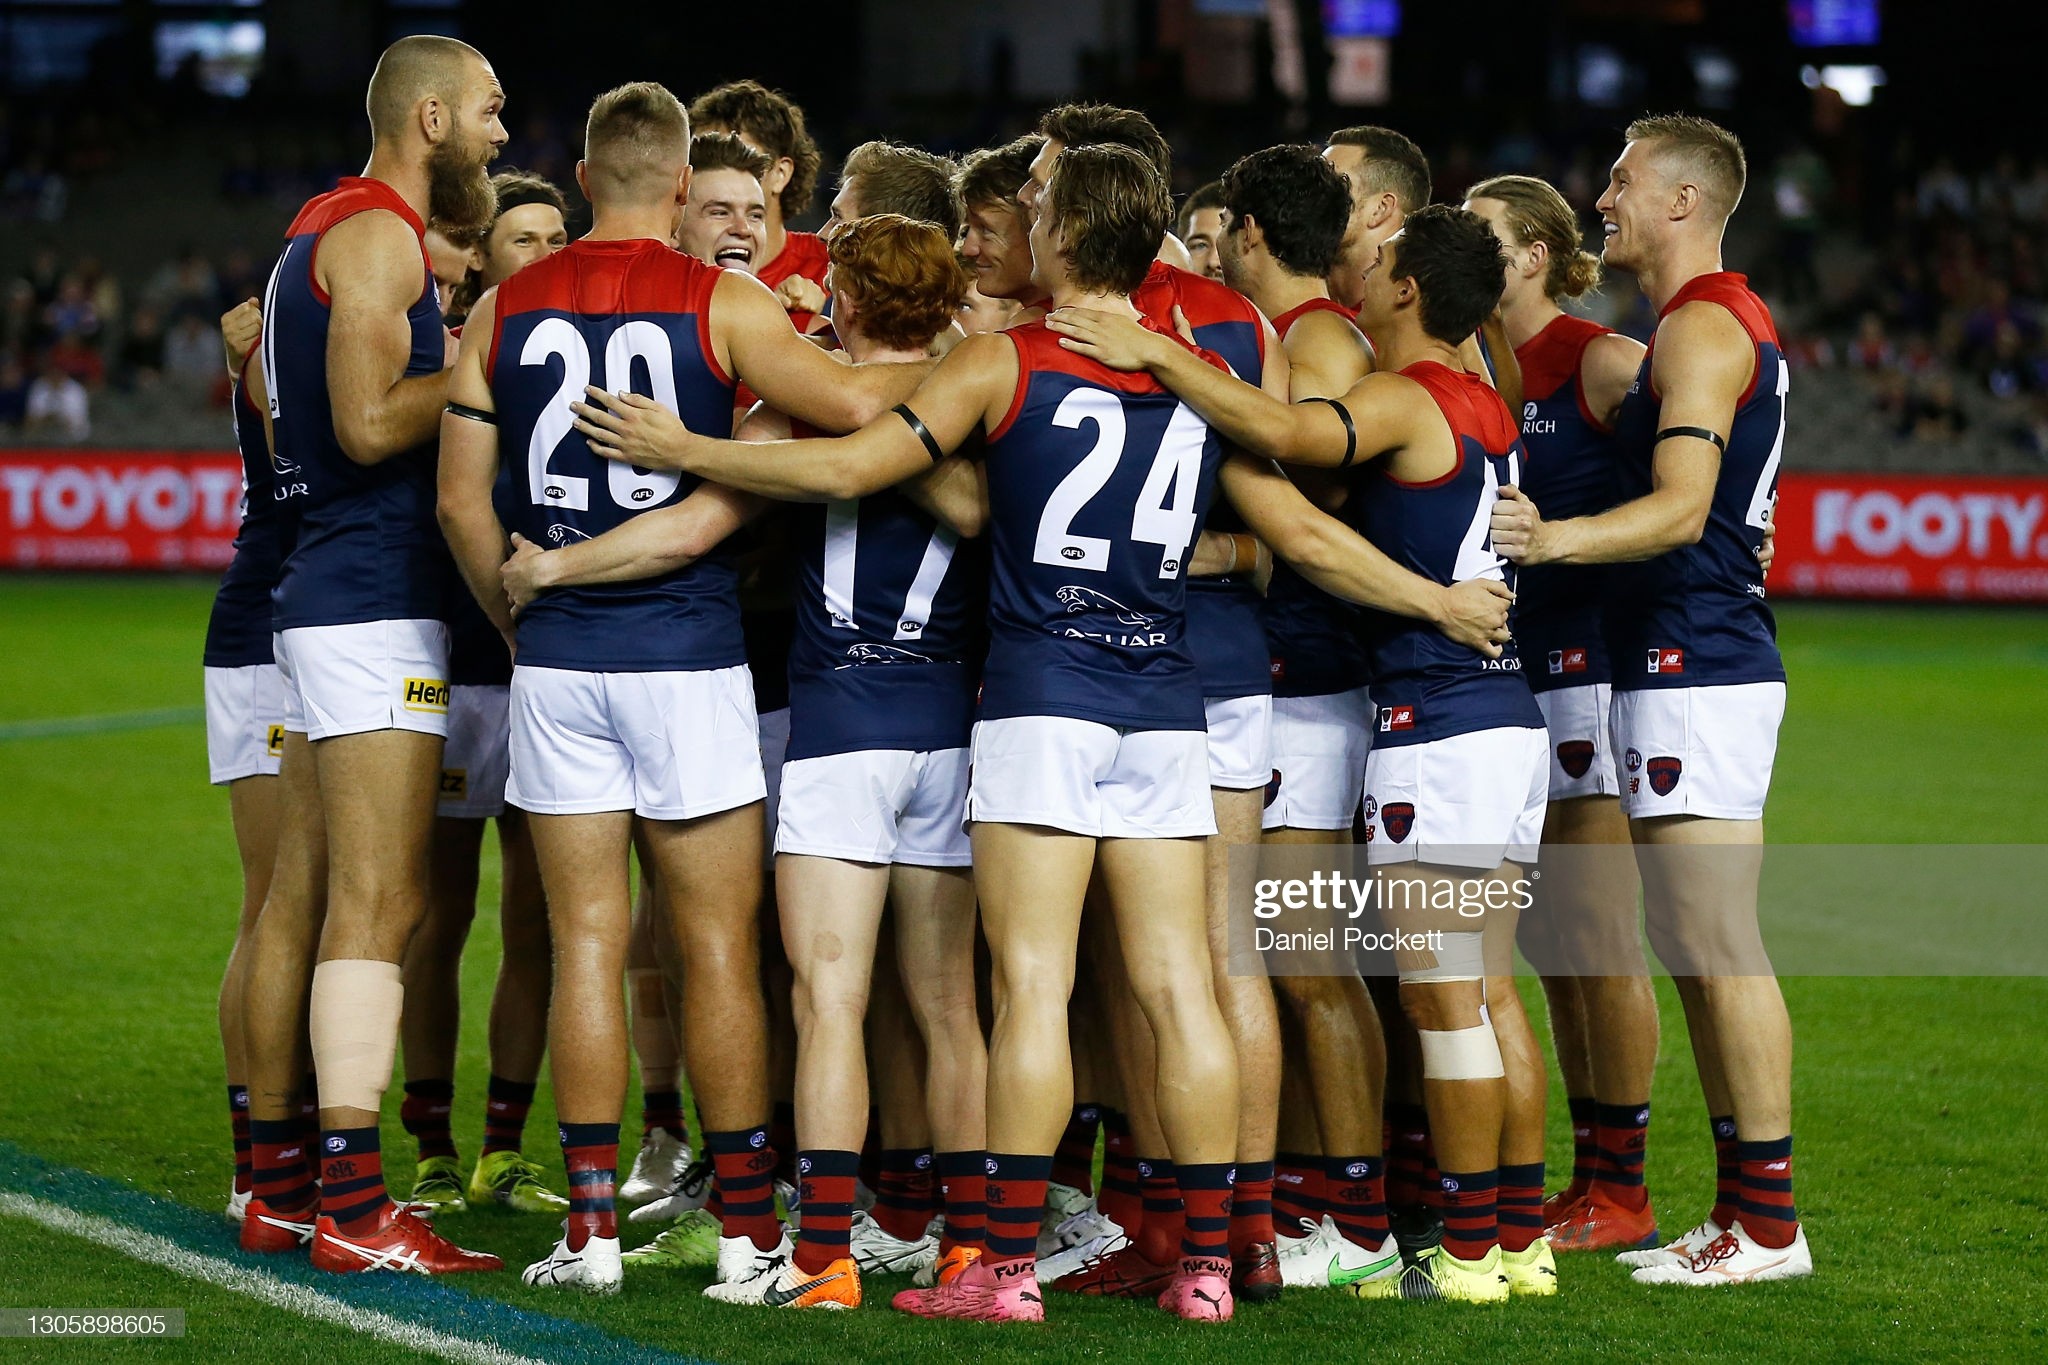 max-gawn-of-the-demons-speaks-to-his-players-ahead-of-the-afl-series-picture-id1305898605